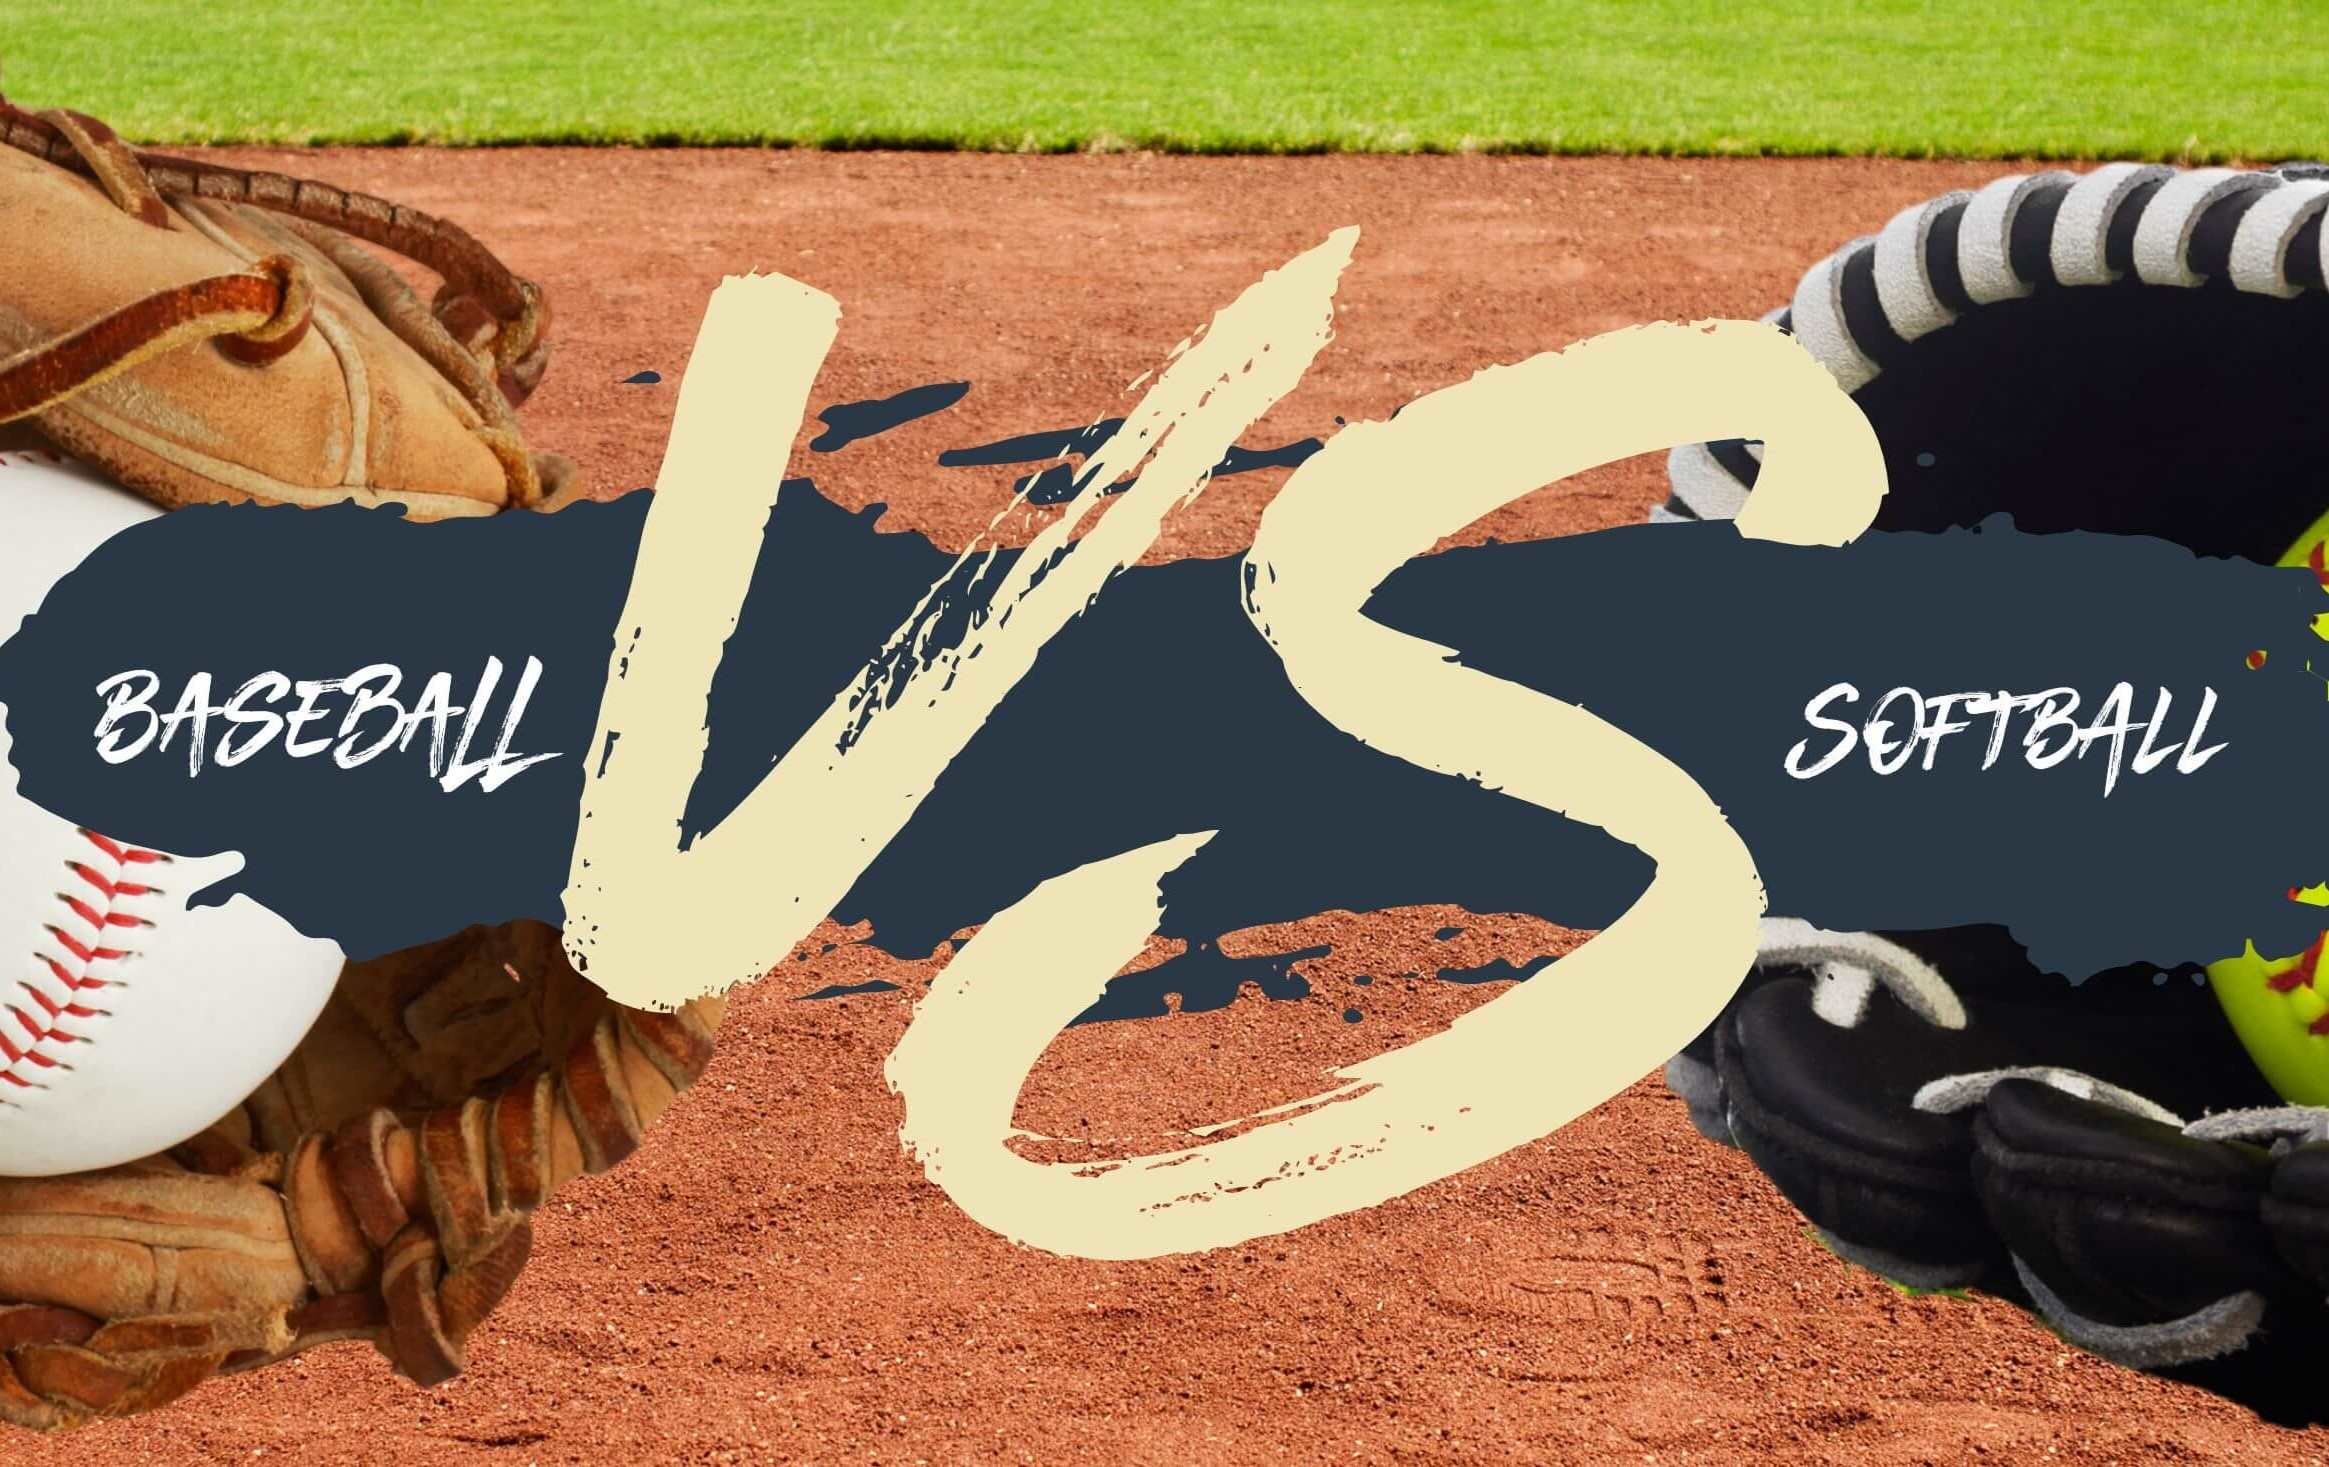 The Mind-Blowing Truth: Fast Pitch Softball Vs Baseball - Which Is More Challenging To Hit?